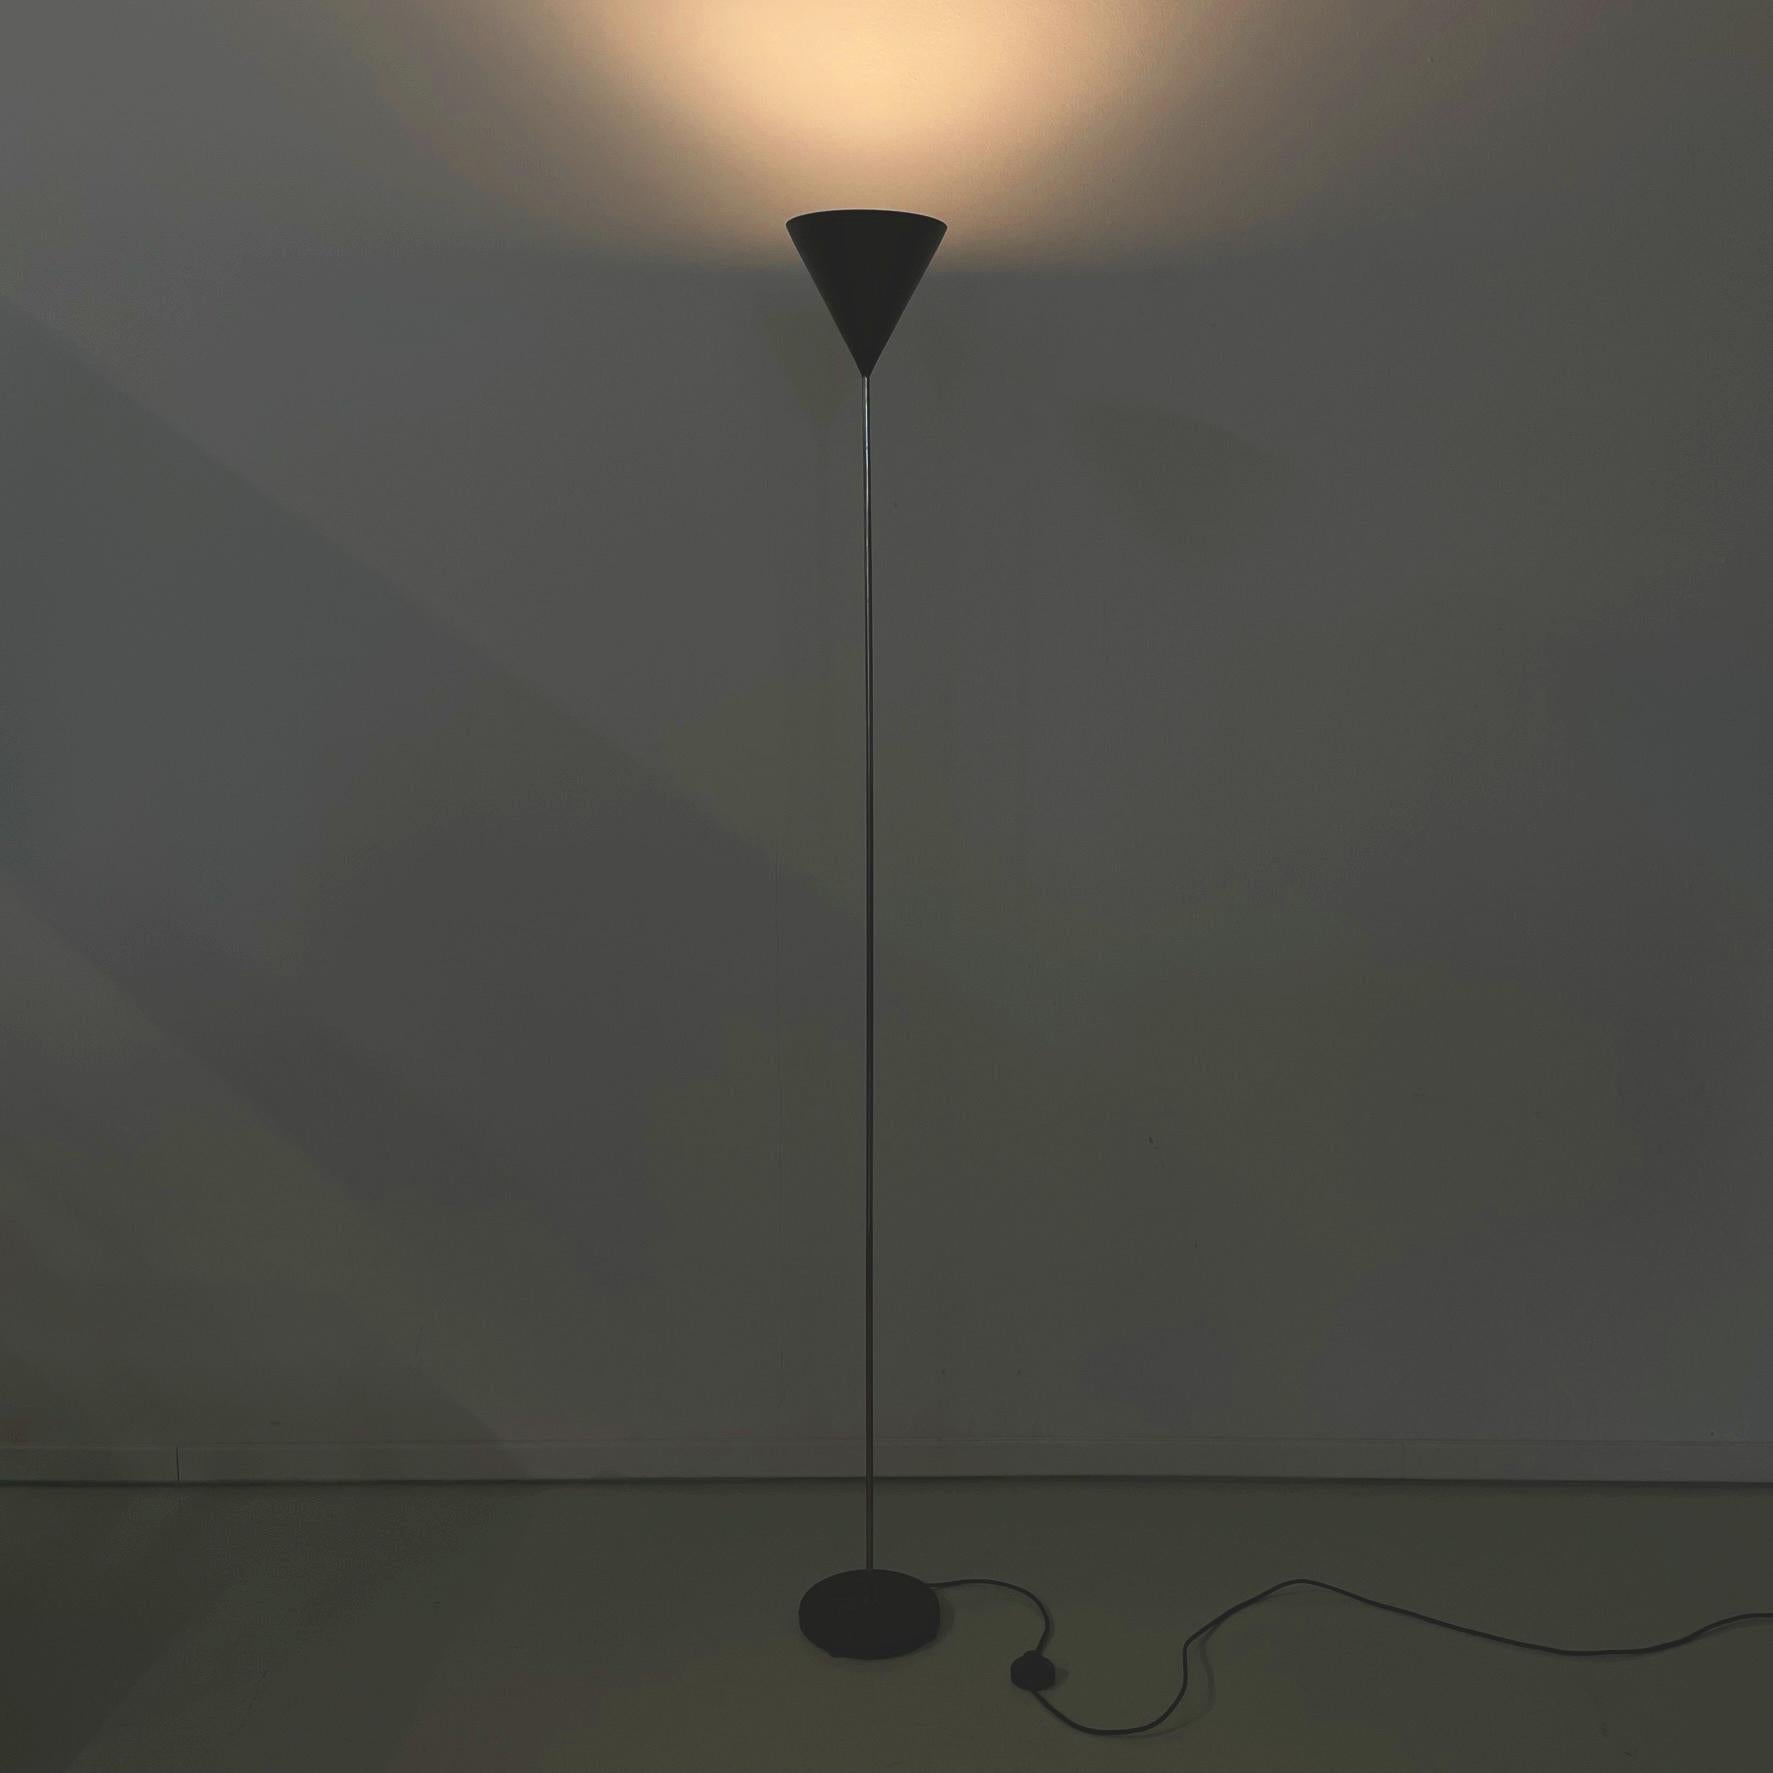 Italian midcentury floor lamp Imbuto by Luigi Caccia Dominioni for Azucena, 1960s
Iconic floor lamp mod. Imbuto (Funnel) with conical lampshade in dark brown-black painted aluminium. The central structure is made up of a thin chromed metal rod. The